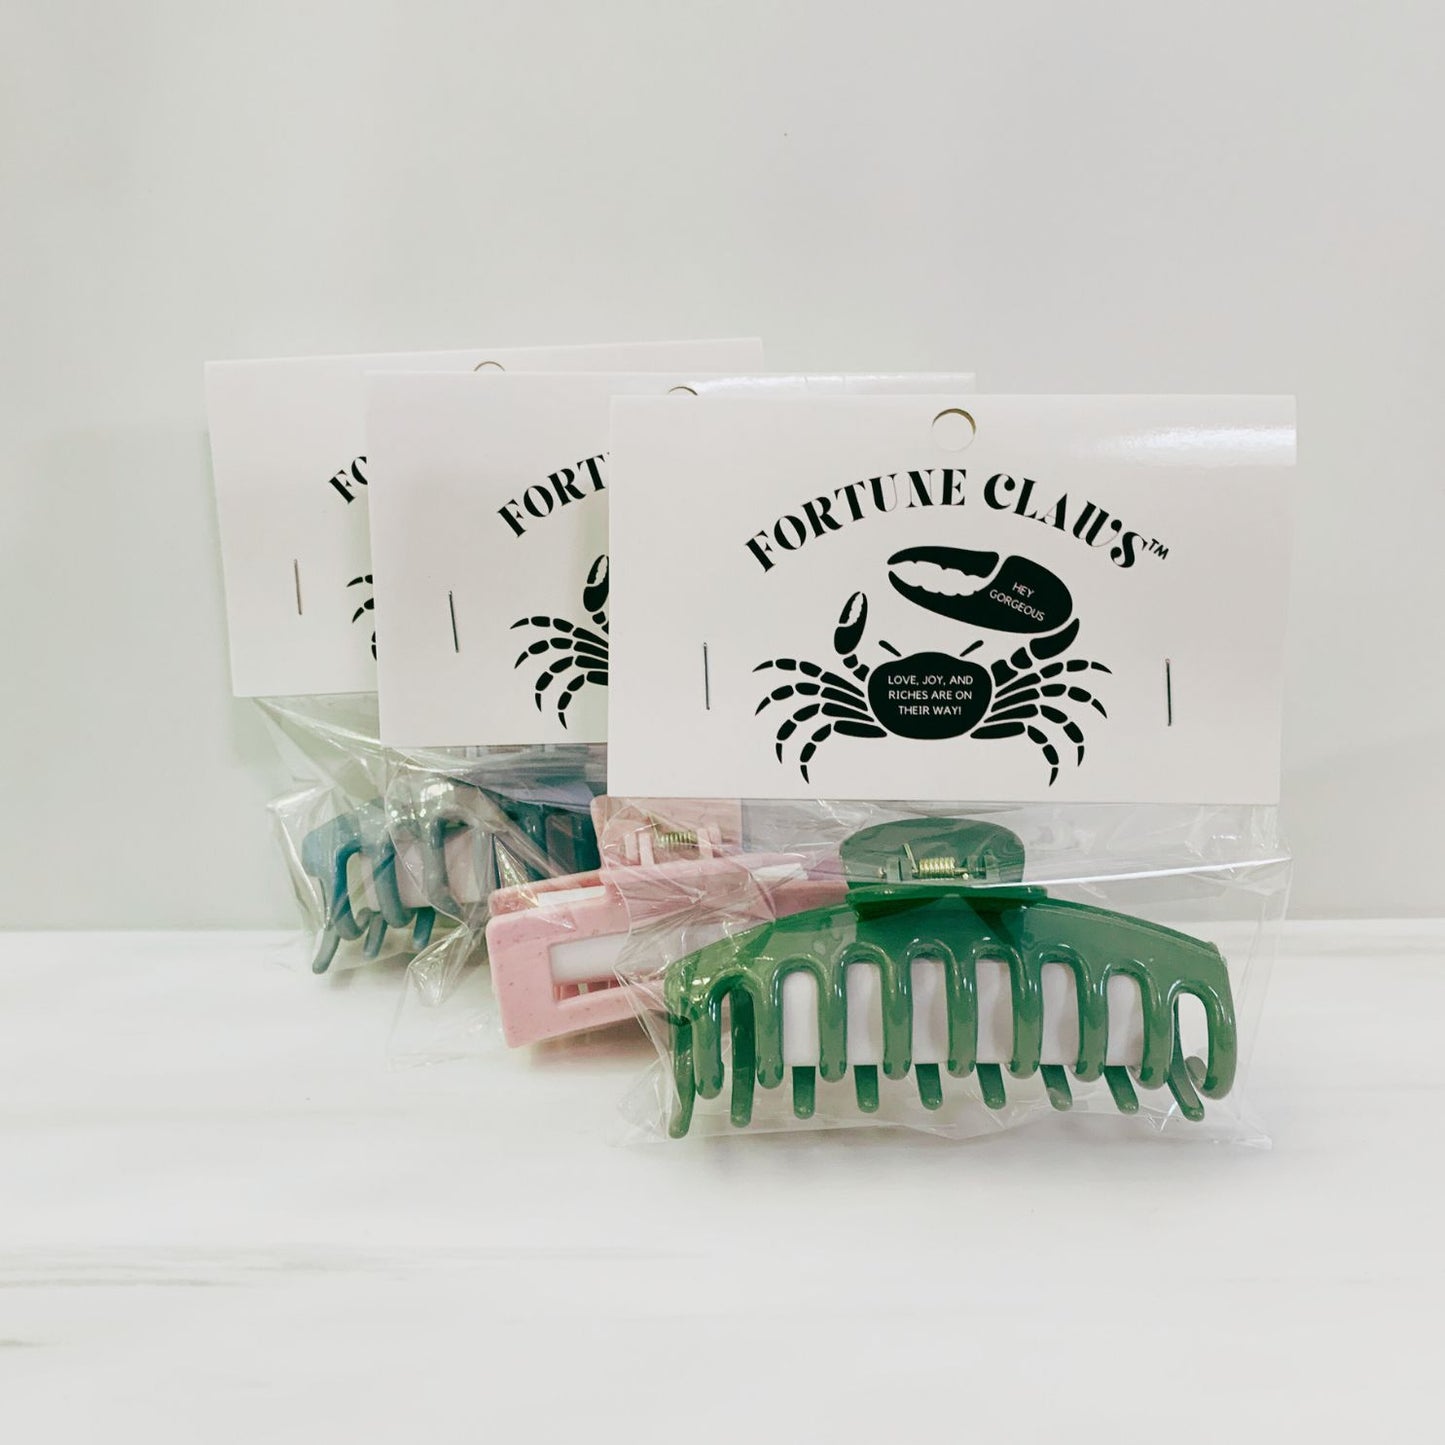 Fortune Claws™ Hair Claws | Unique Fortune Inside | Single or Gift Pack